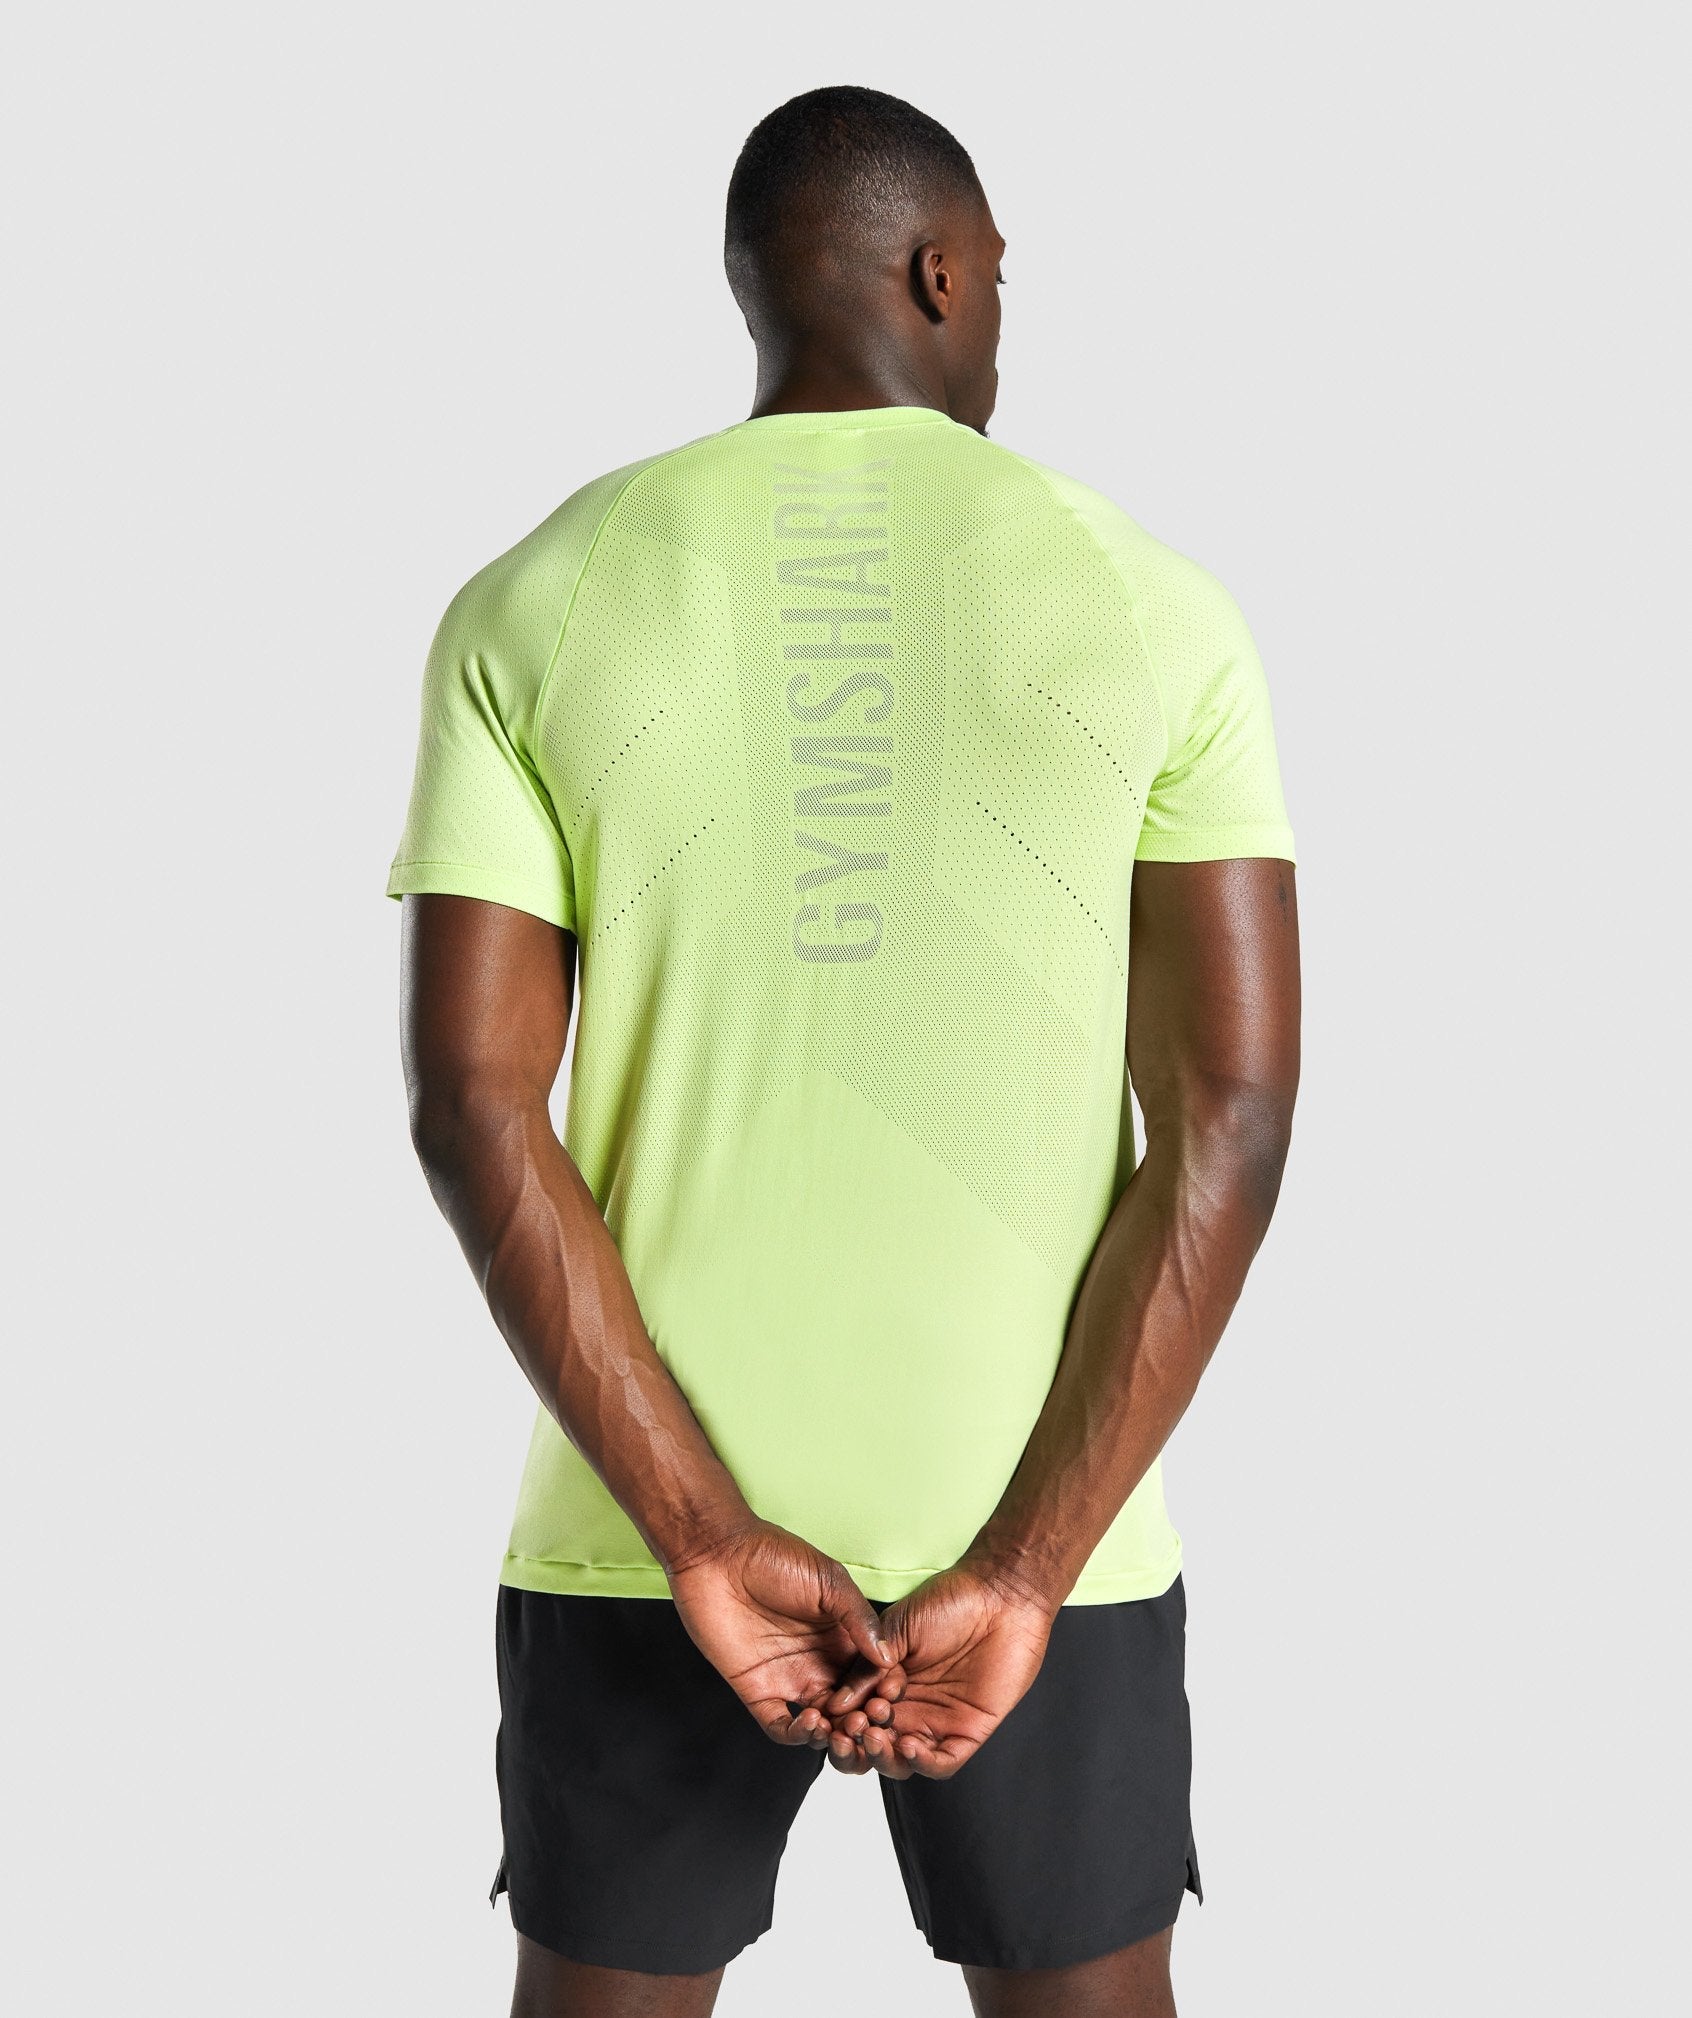 Apex Perform T-shirt in Green - view 2